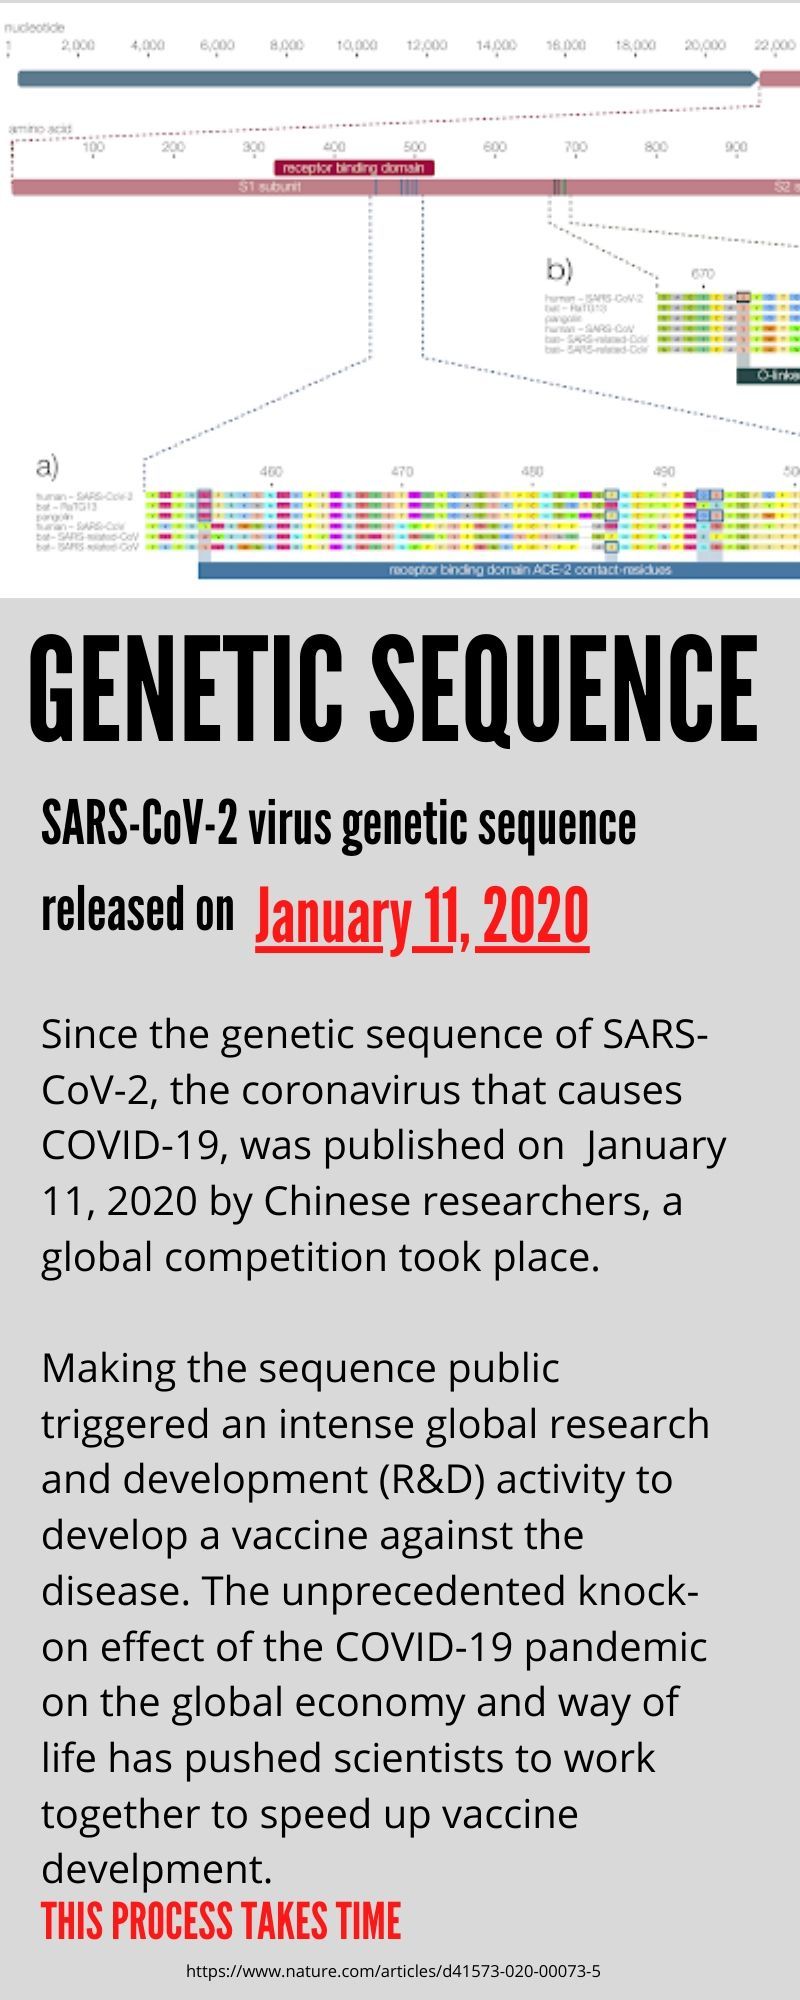 genetic sequence